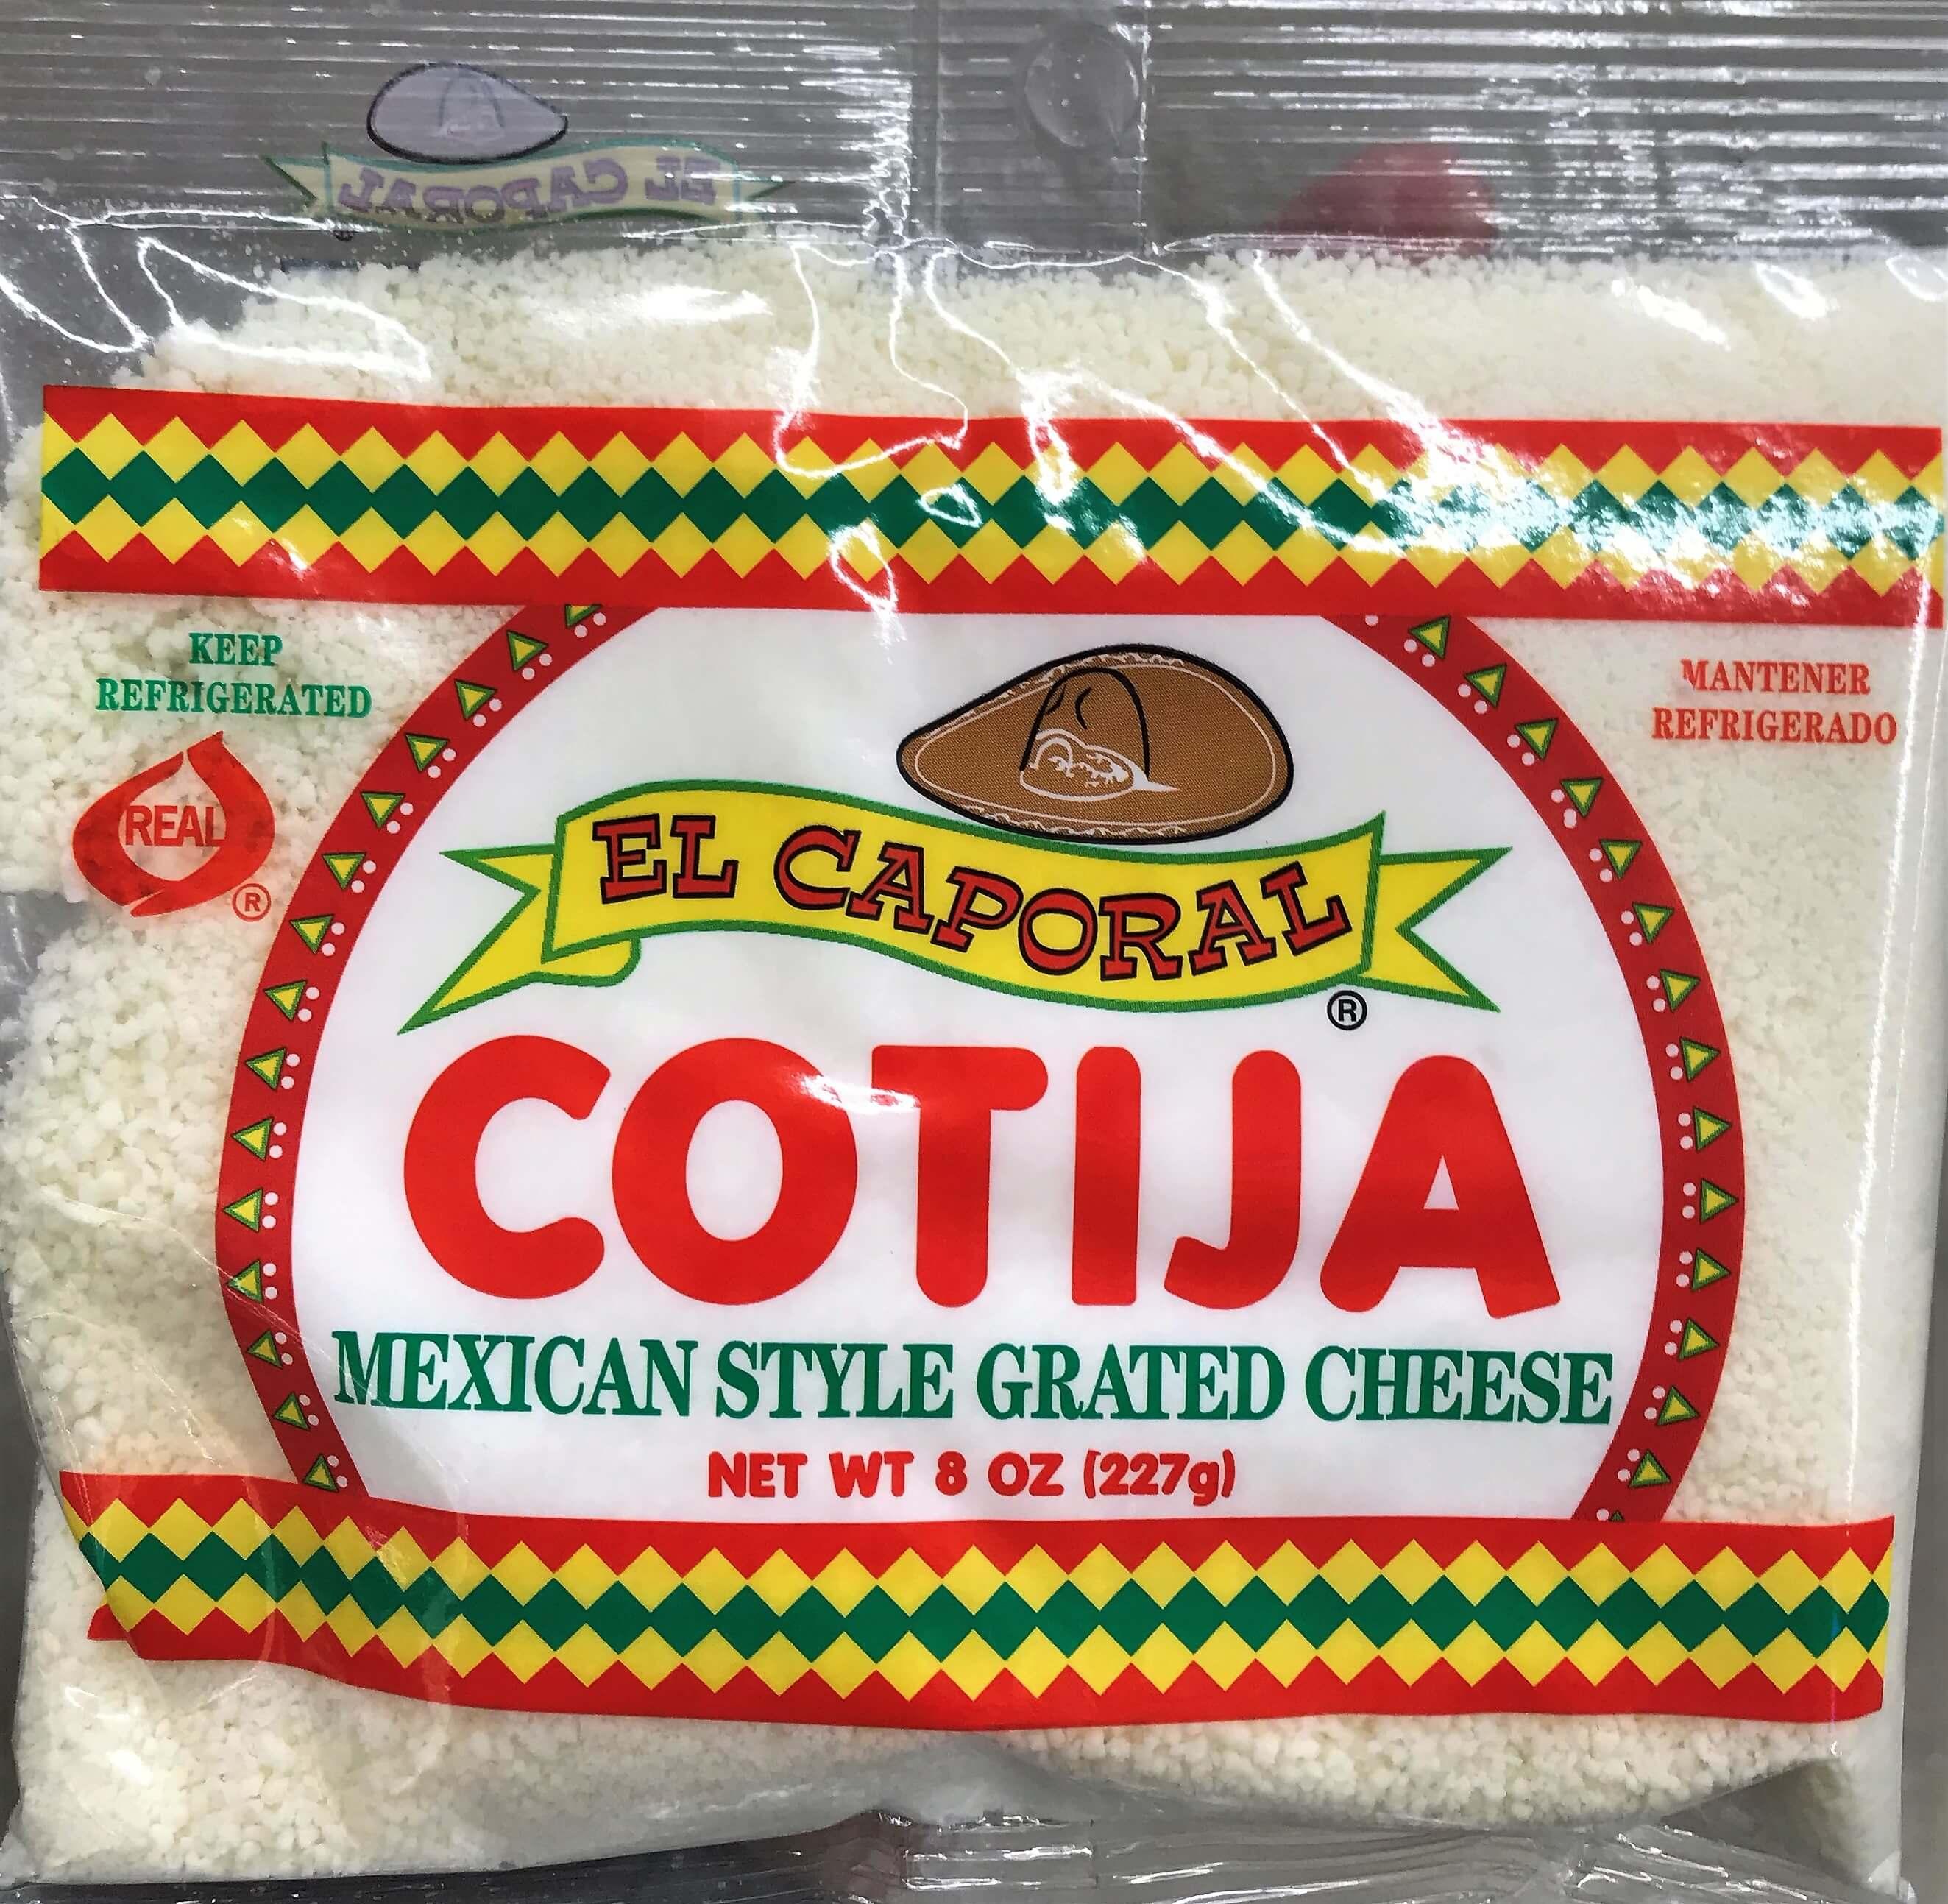 El Caporal - Cotija Mexican Style Grated Cheese 8 oz